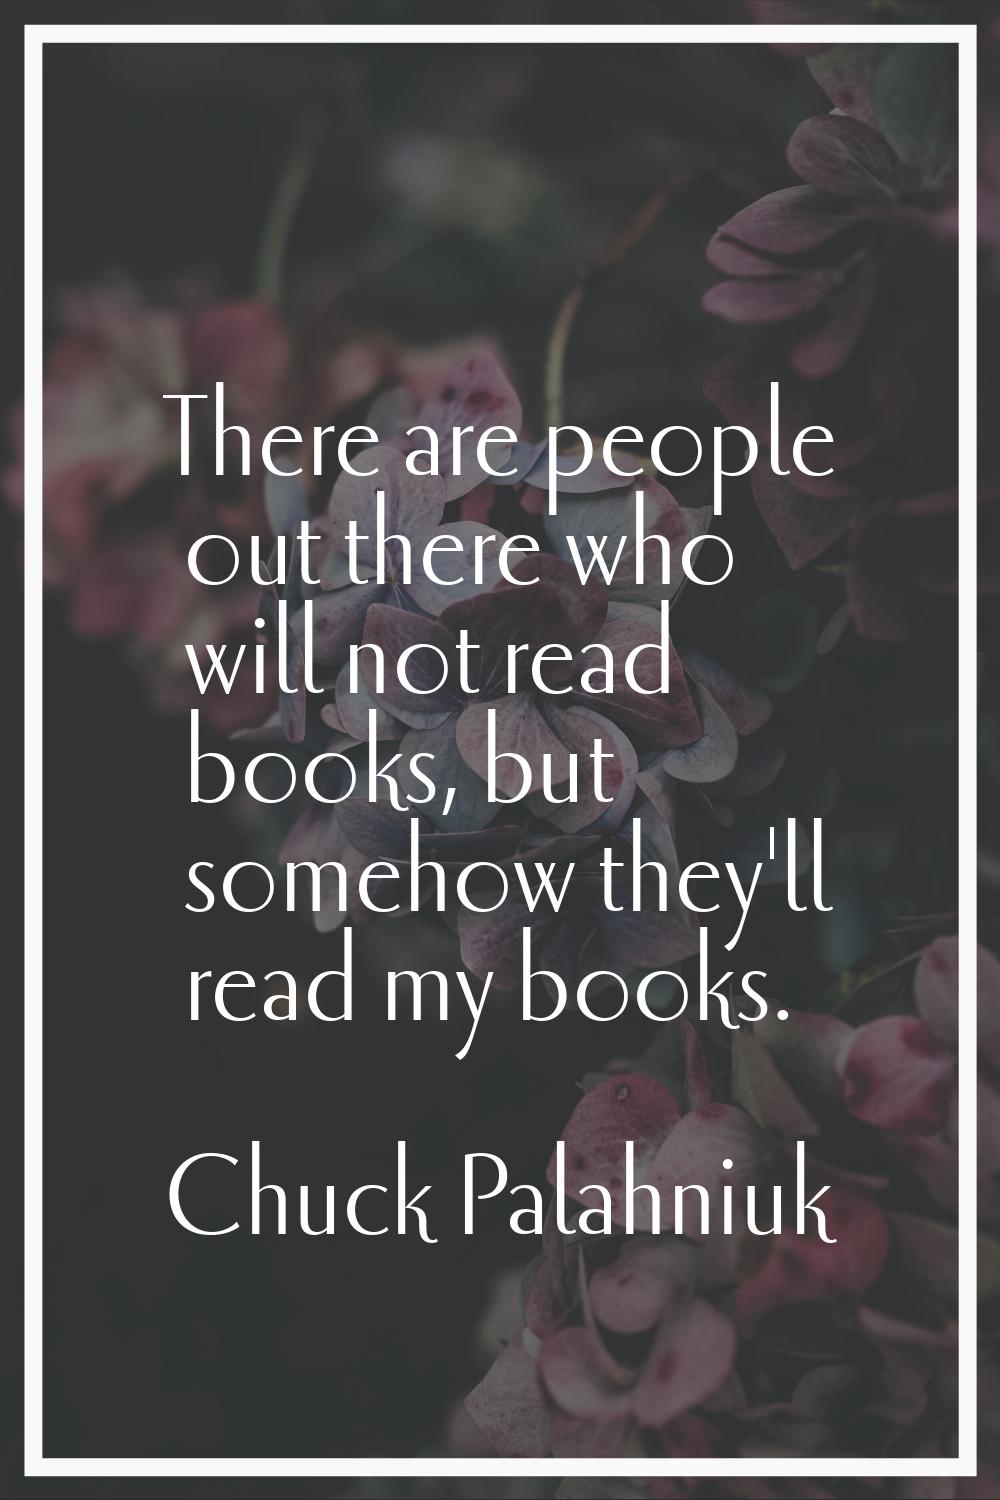 There are people out there who will not read books, but somehow they'll read my books.